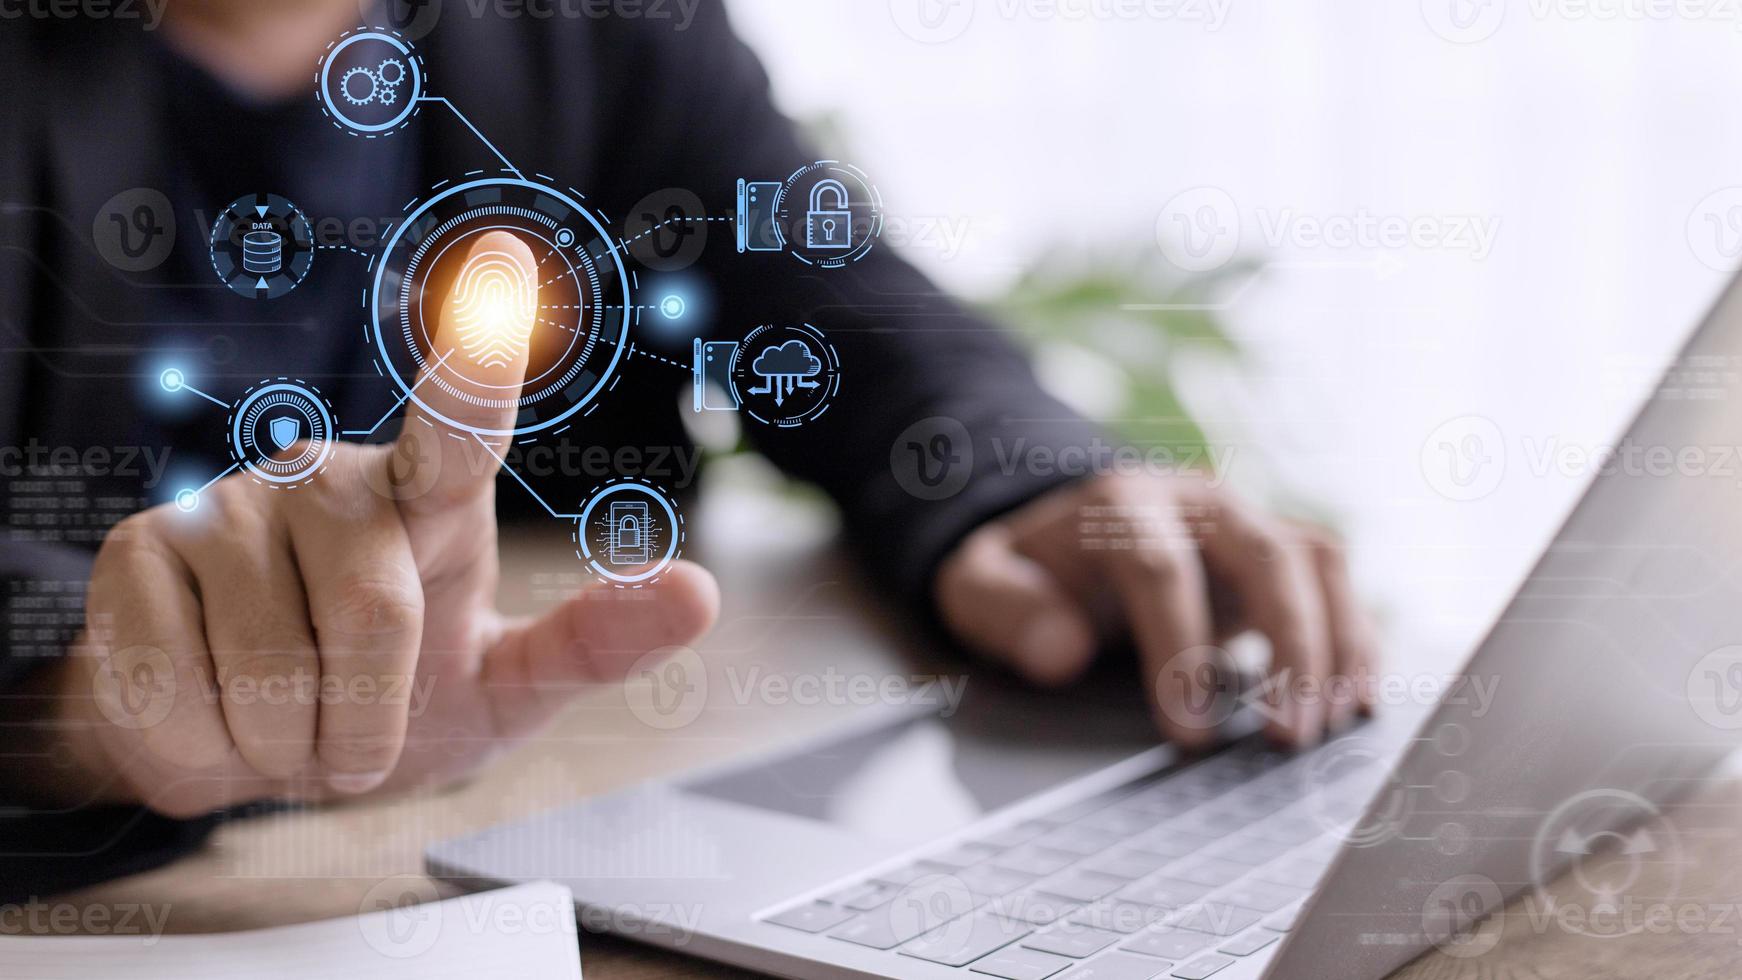 Technology fingerprint scan provides security. digital transformation change management,new technology big data and business process strategy, automate operation, customer service management. photo